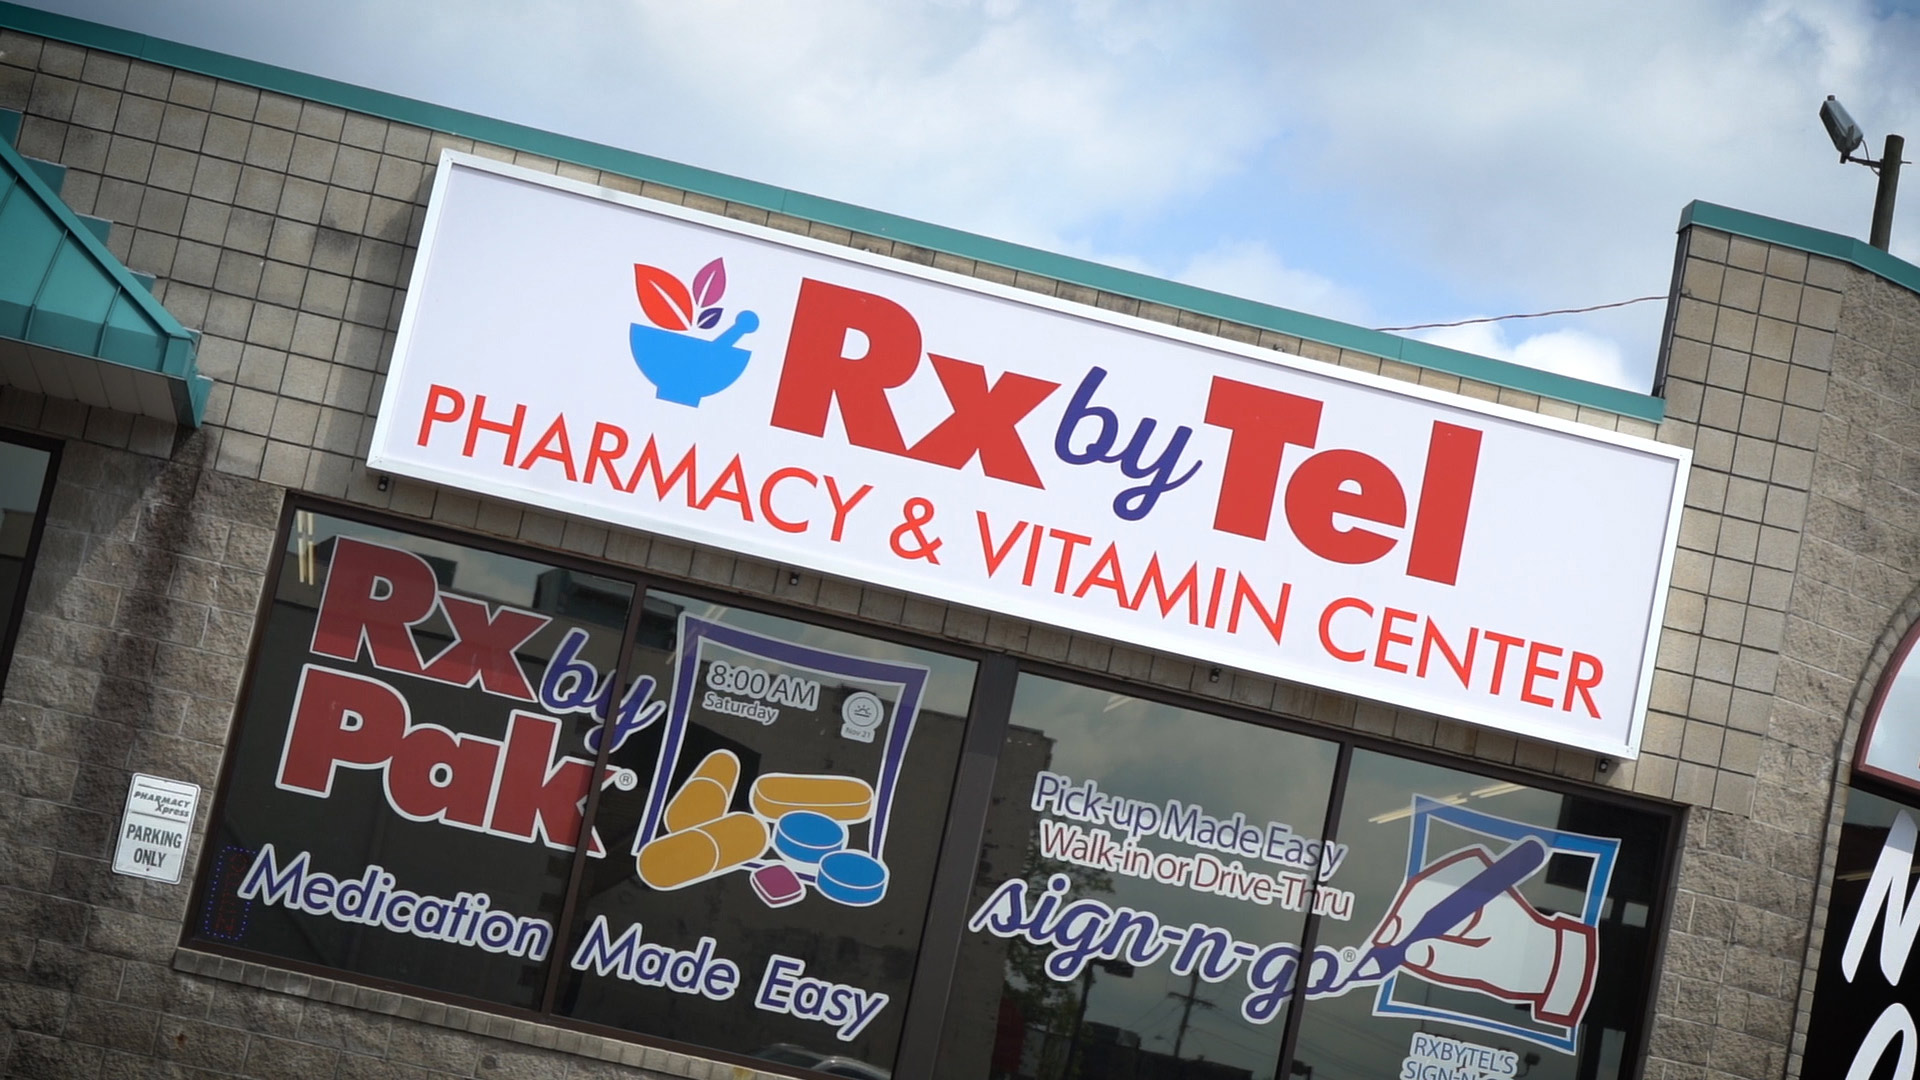 RXbyTel Pharmacy in Charleston reopens after owner comes out of retirement.